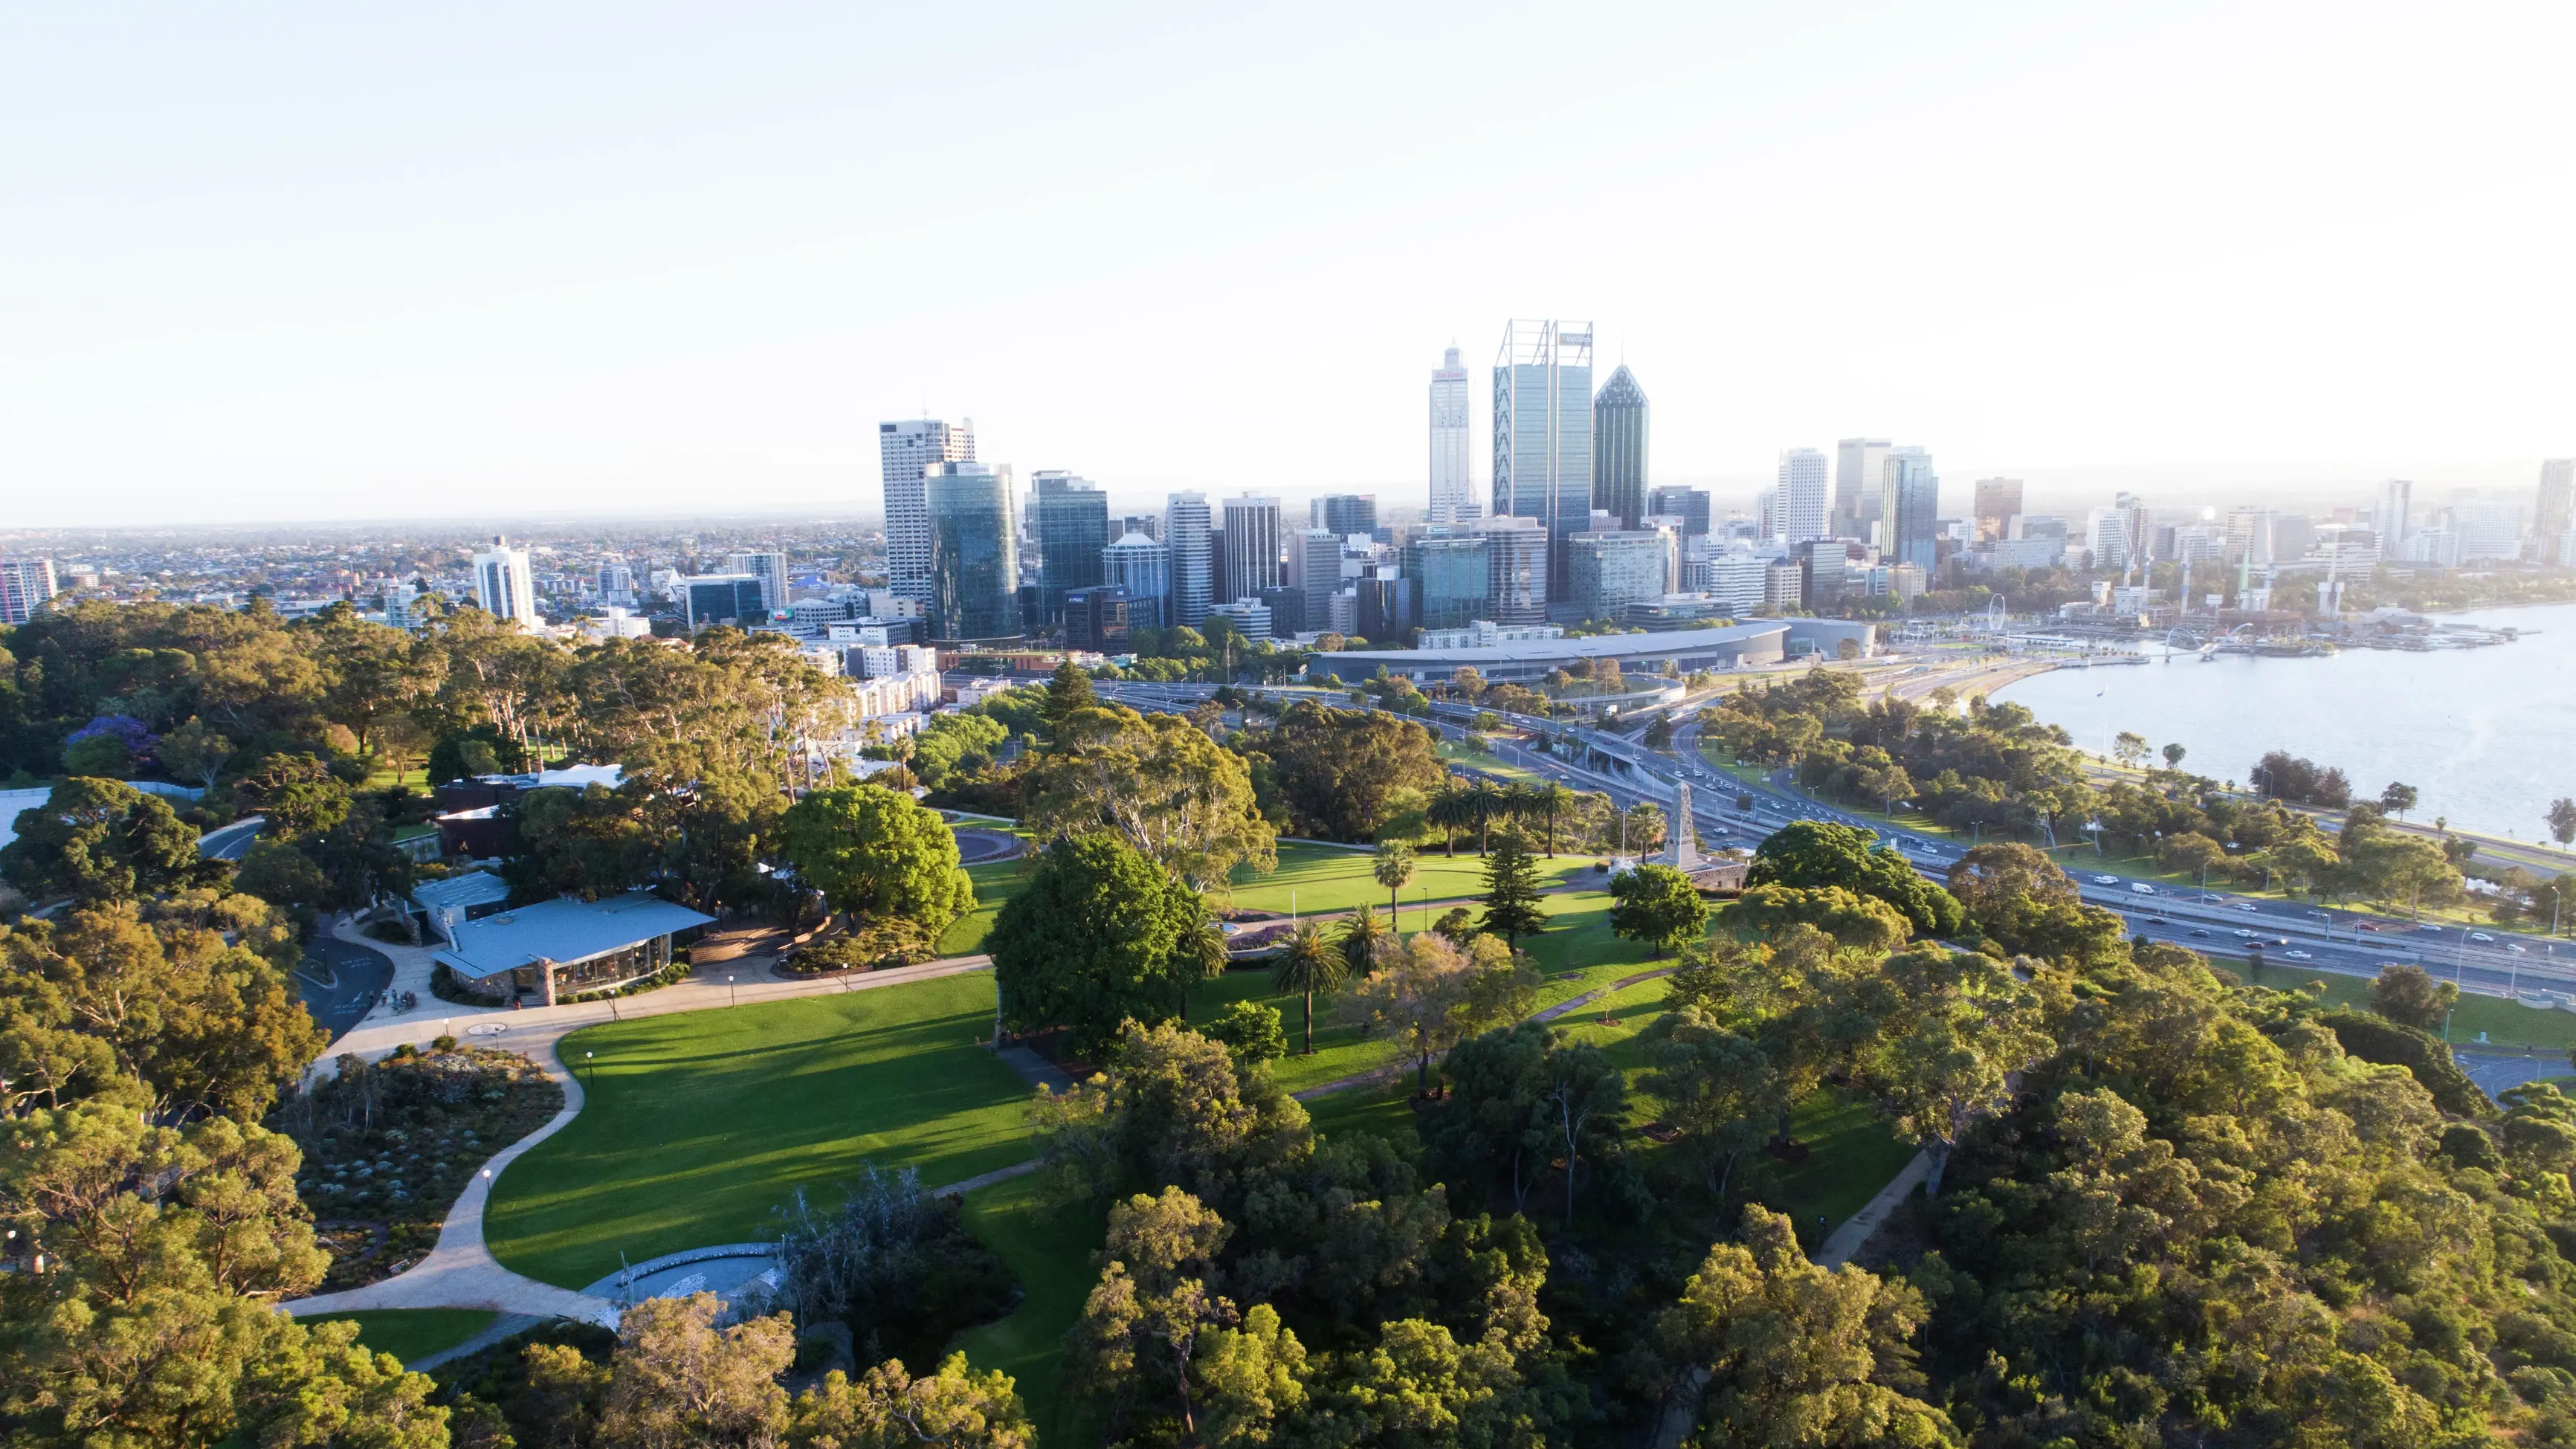 Aerial view of Kings Park and Botanic Garden with Perth City skyline in the background. Image credit: Tourism Western Australia